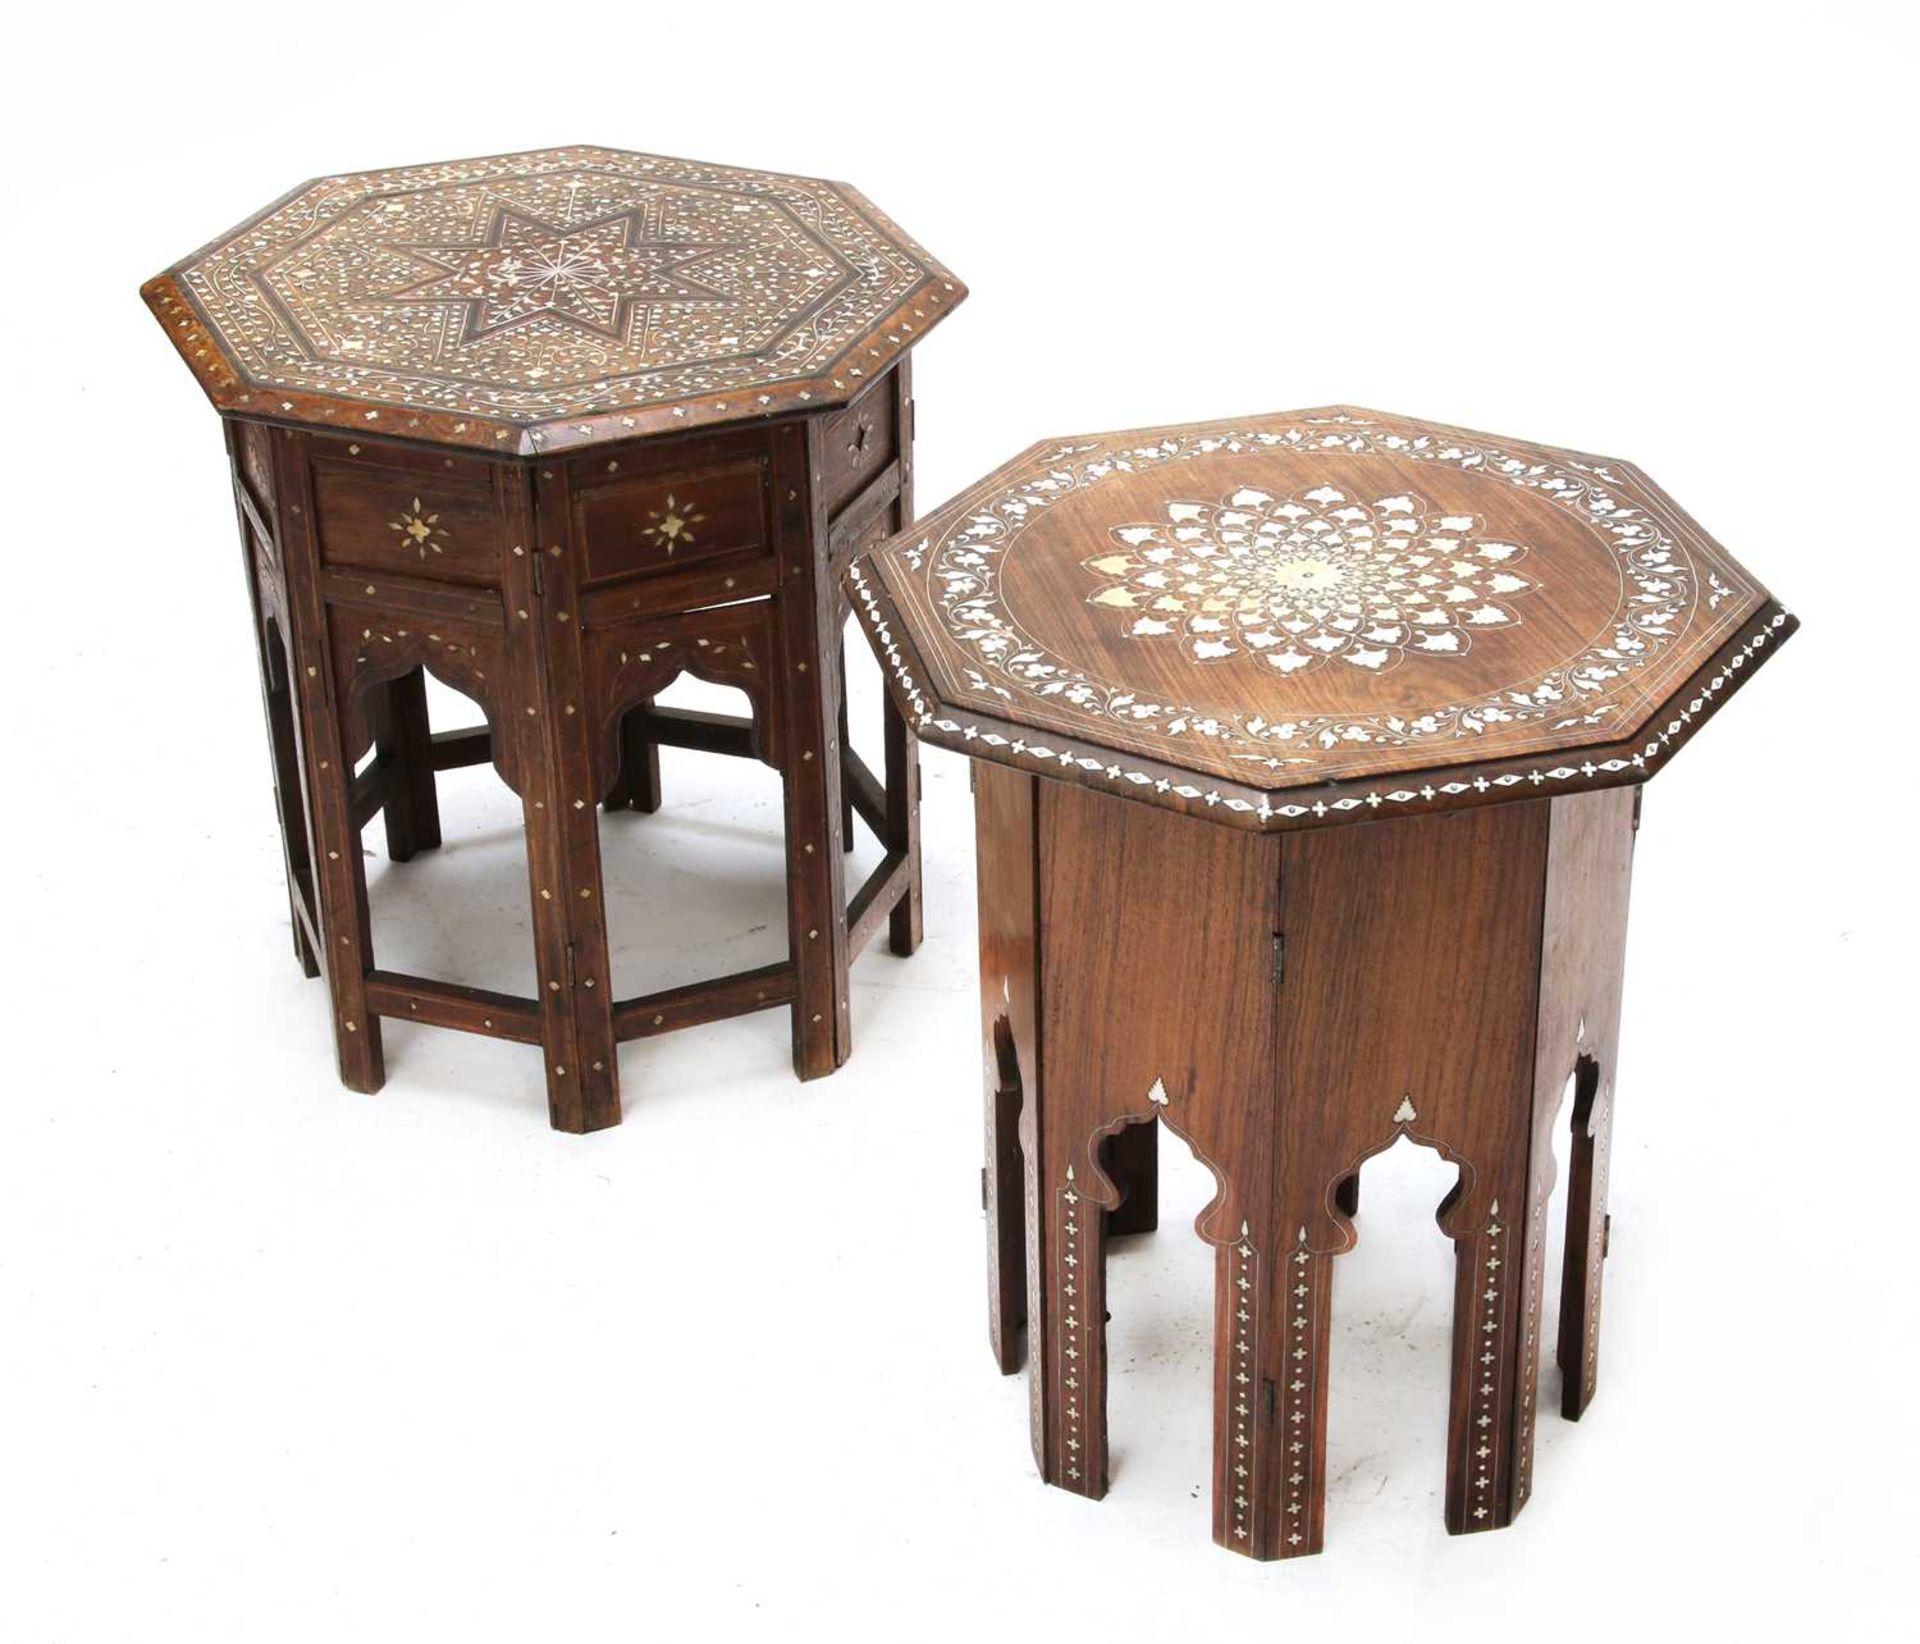 Two small Indian folding octagonal tables,